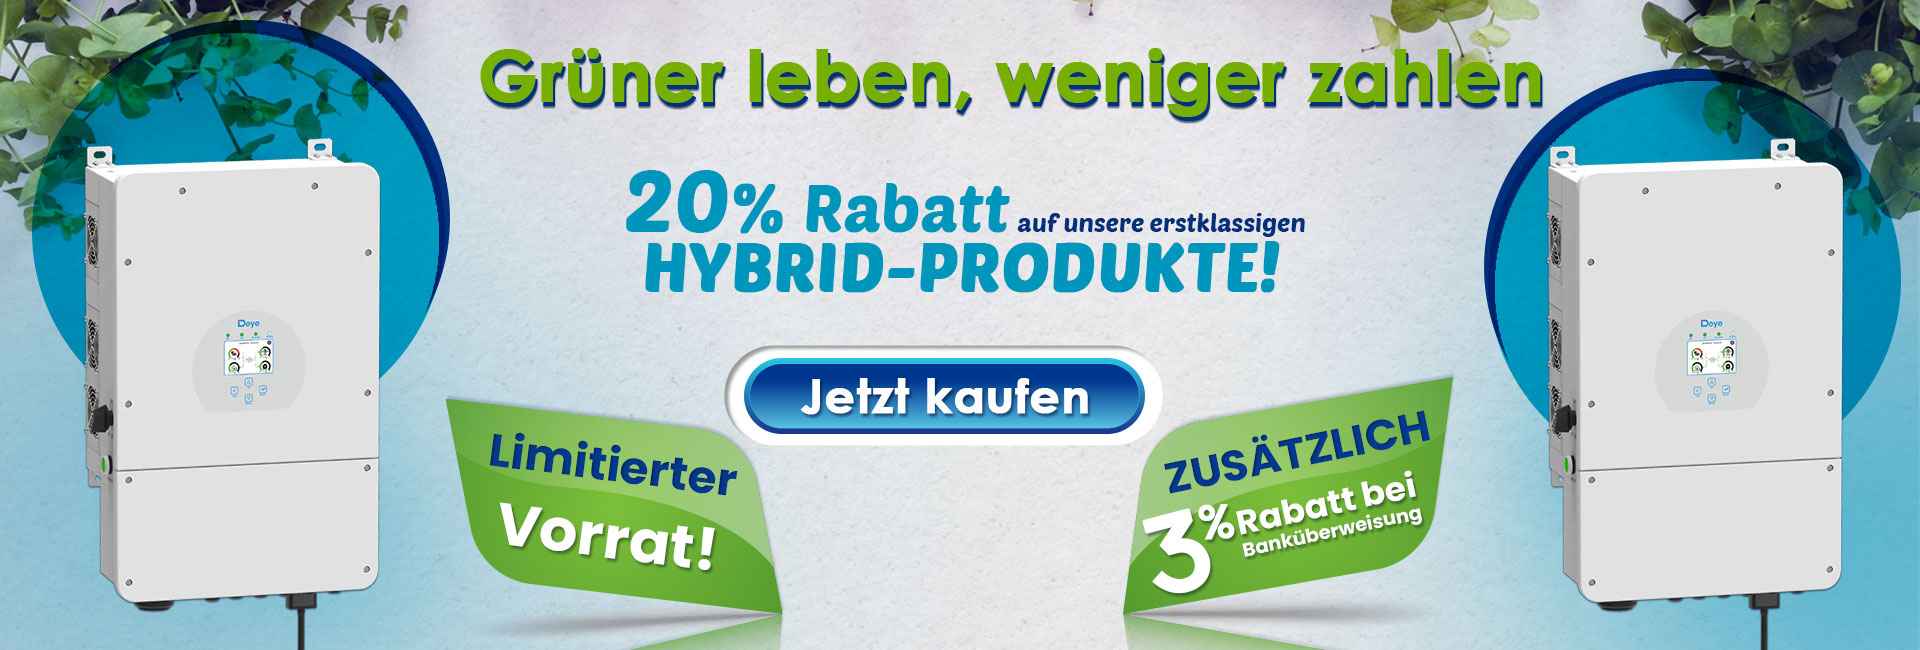 hybrid-products-banner_5_11zon